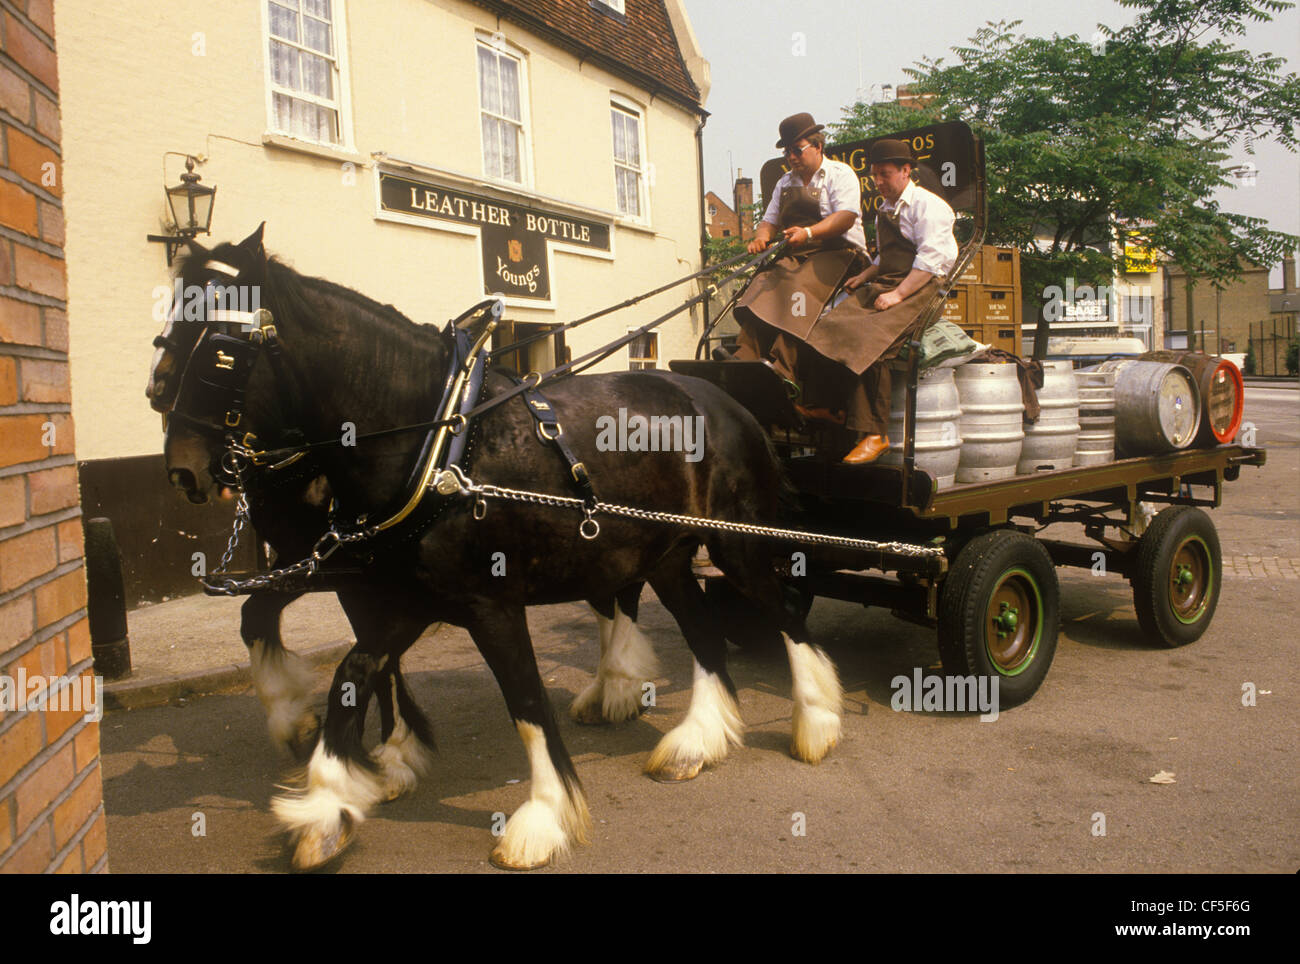 Youngs Brewery horse and cart Wandsworth traditional delivery of beer to local pub Leather Bottle in the Kingston Road, South Wimbledon.  England 1980s circa 1985 UK HOMER SYKES Stock Photo